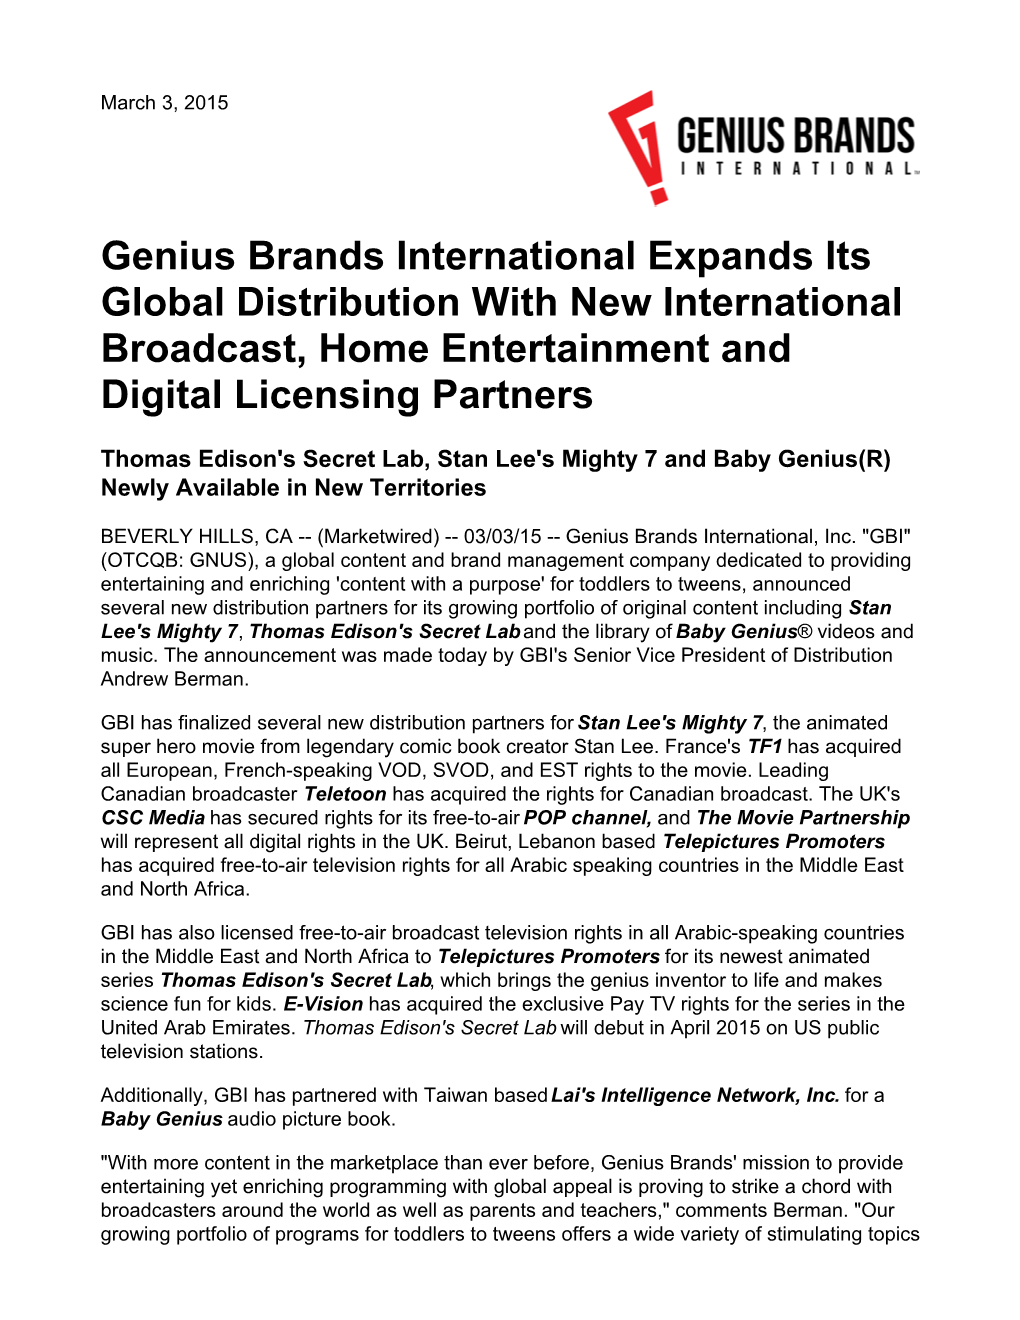 Genius Brands International Expands Its Global Distribution with New International Broadcast, Home Entertainment and Digital Licensing Partners